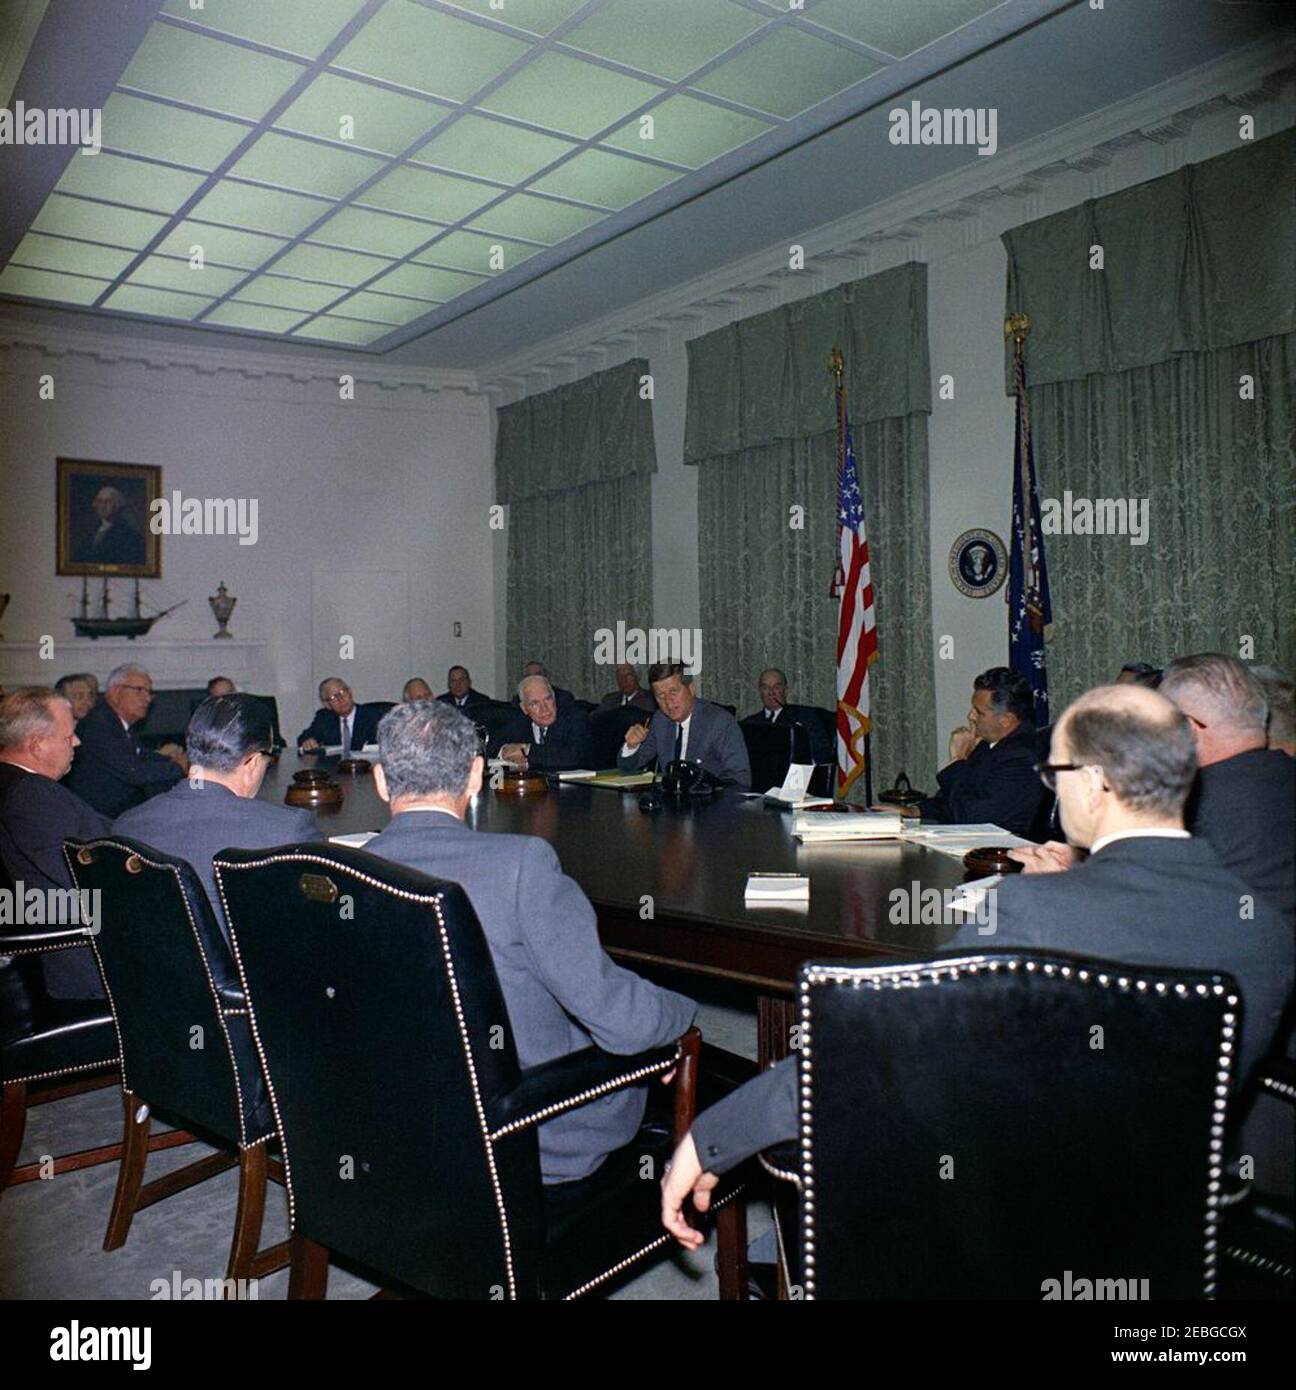 Visit of members of the National Export Expansion Council in the Cabinet Room, 12:10PM. President John F. Kennedy (center, seated at right side of table) talks with members of the National Export Expansion Council in the Cabinet Room of the White House, Washington, D.C. Secretary of Commerce Luther H. Hodges sits left of President Kennedy; Roger P. Sonnabend, Executive Vice President of Hotel Corporation of America (three seats left of Secretary Hodges, mostly hidden), sits at the head of the table; all others are unidentified. [Please see the Presidentu2019s schedule for a complete list of a Stock Photo